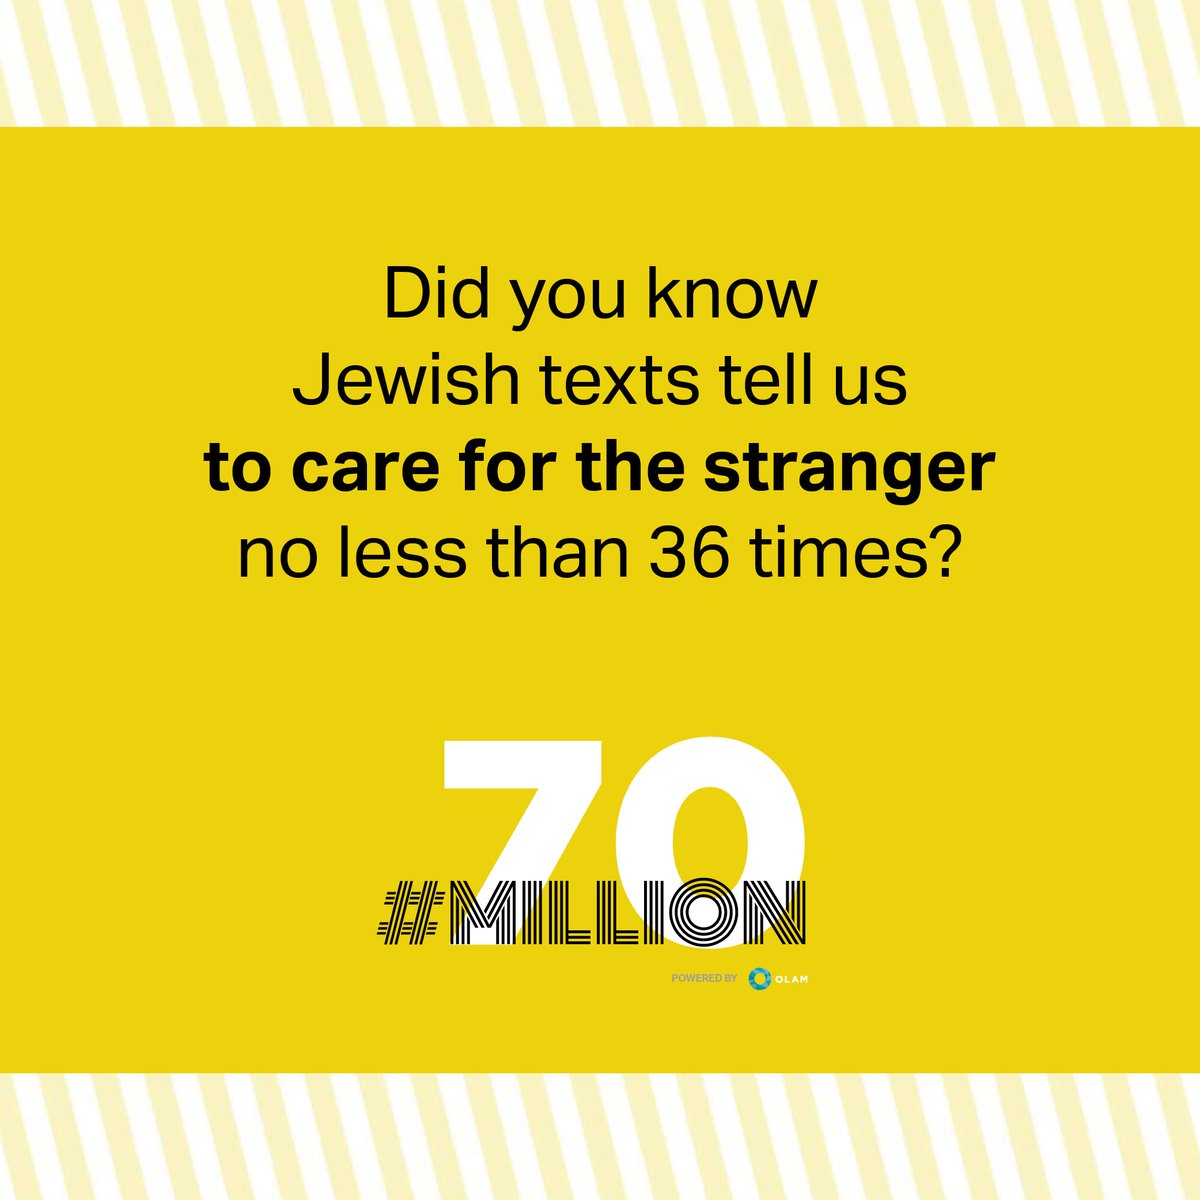 Jewish history is full of displacement and forced migration. We must draw on our own story to act for the world’s #70million refugees and asylum seekers by protecting the vulnerable and honoring the resilient. Join the call at 70million.org